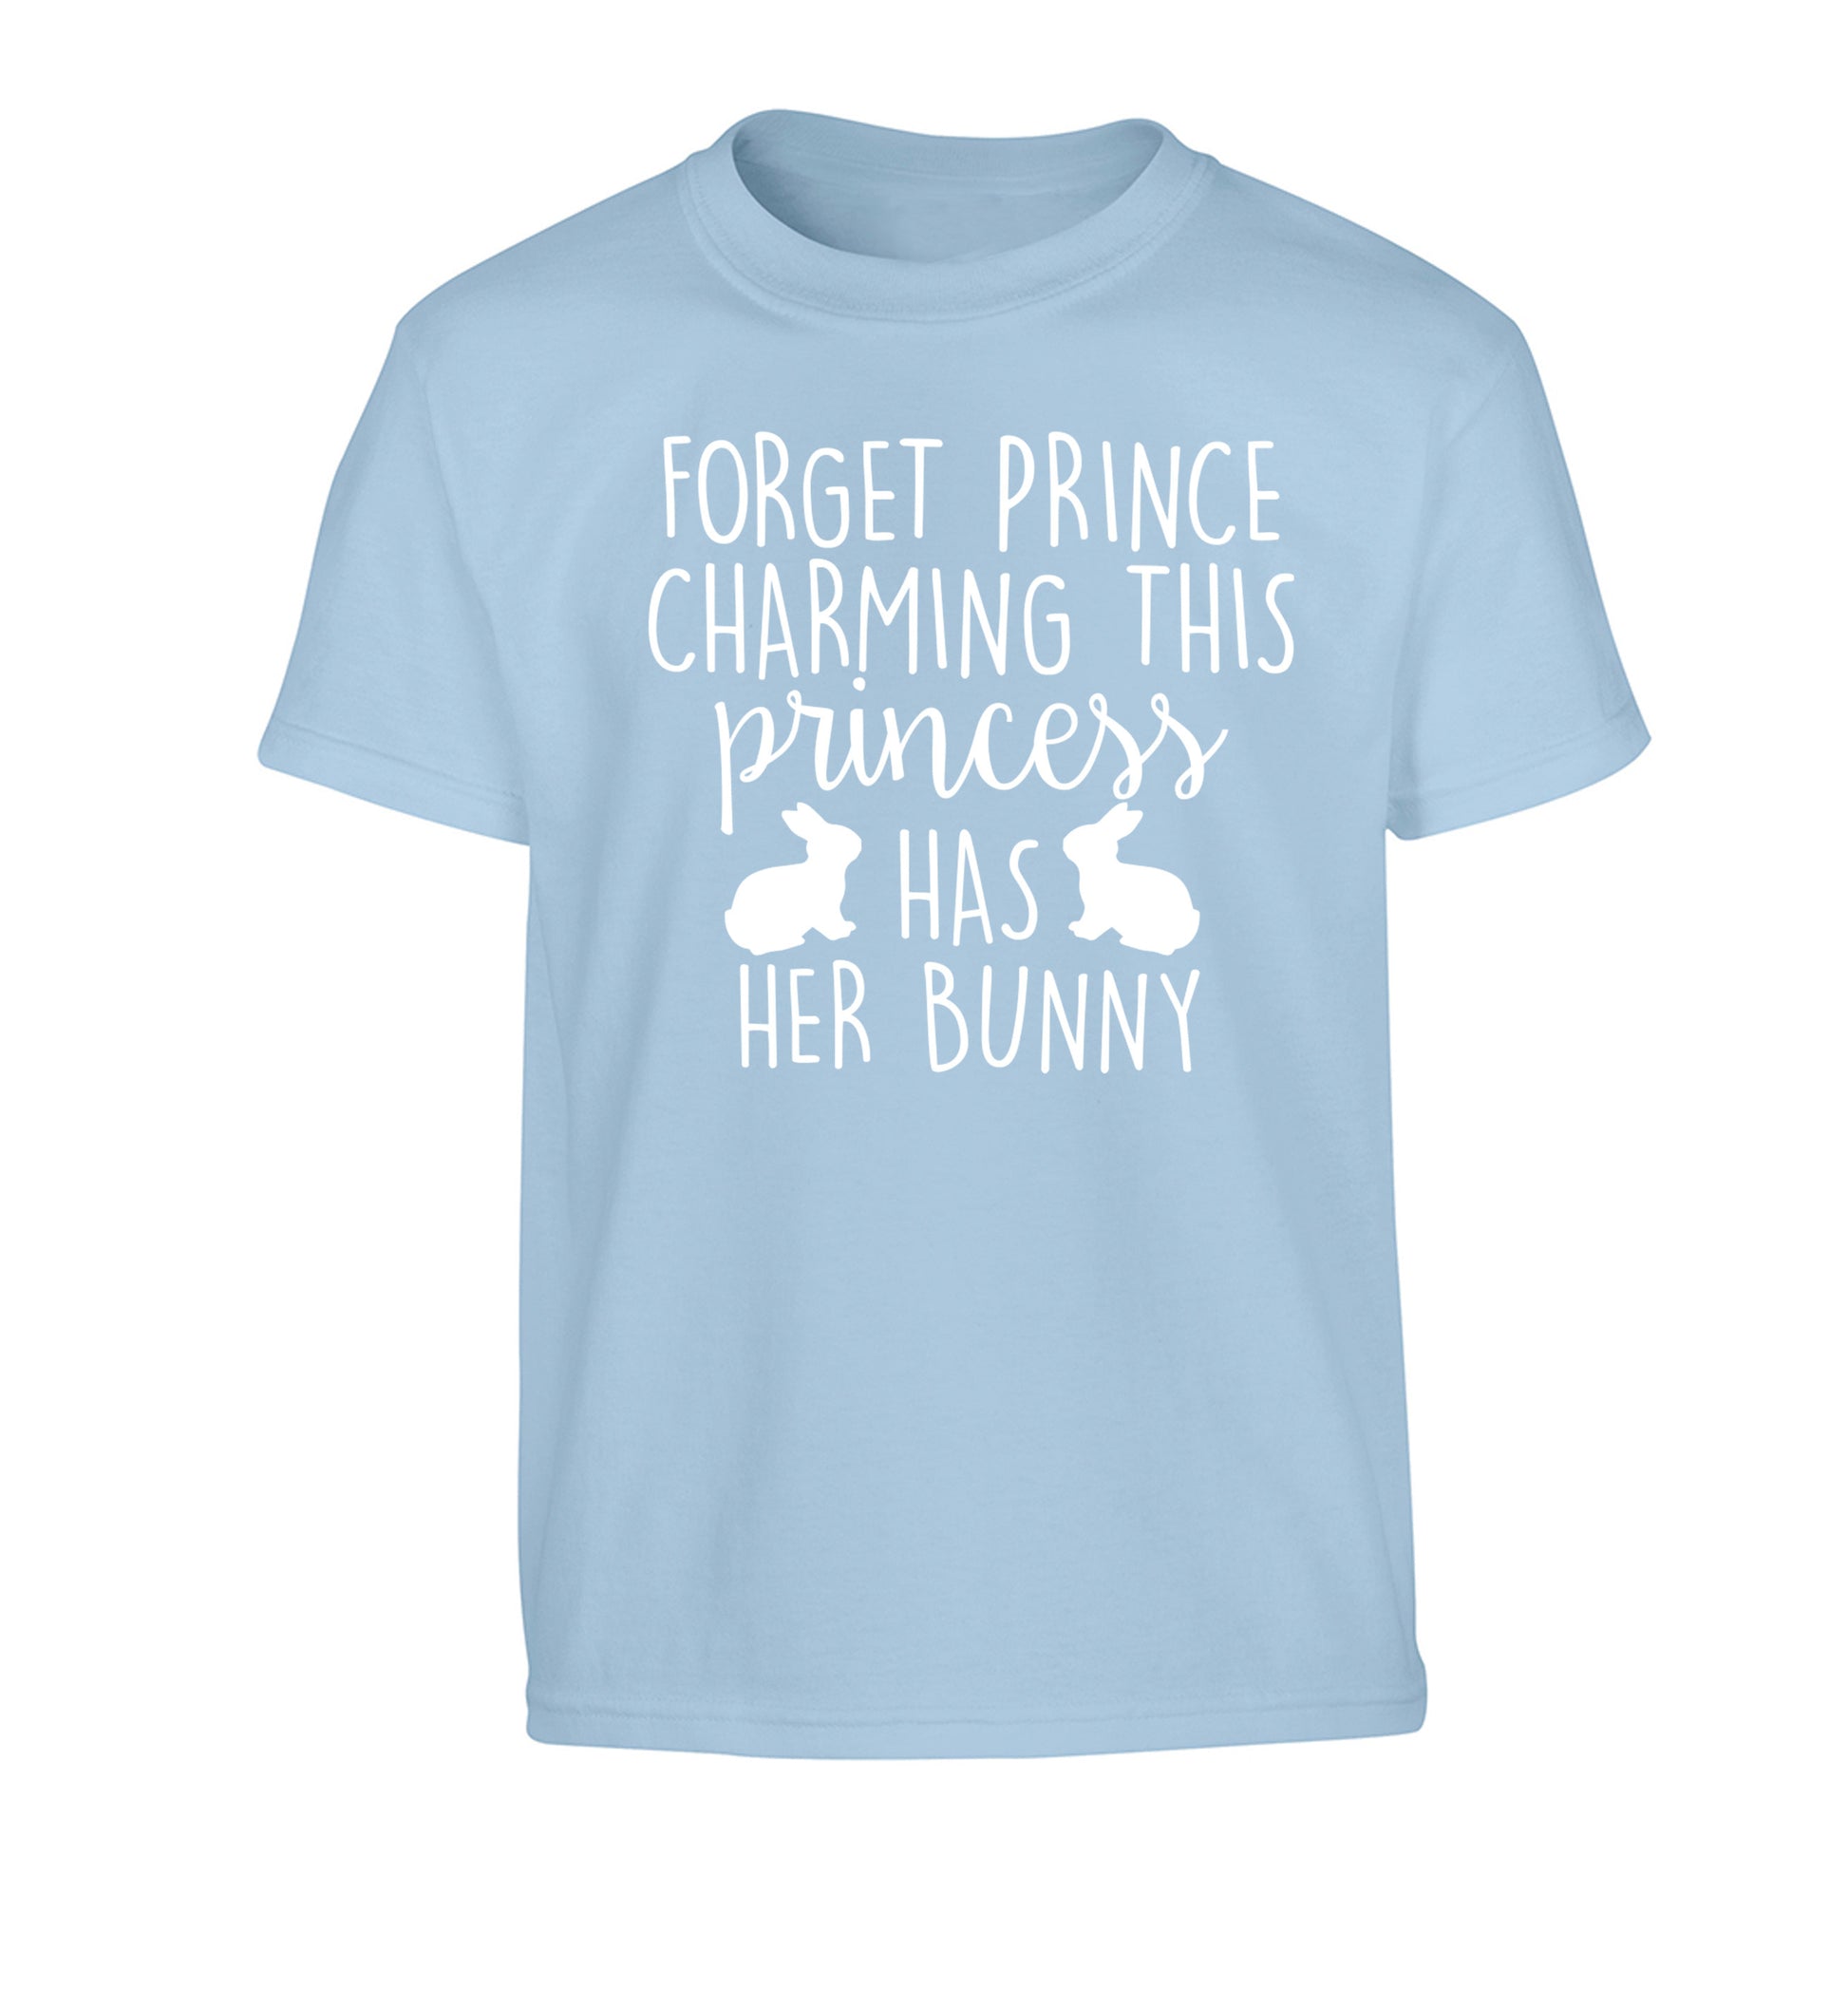 Forget prince charming this princess has her bunny Children's light blue Tshirt 12-14 Years